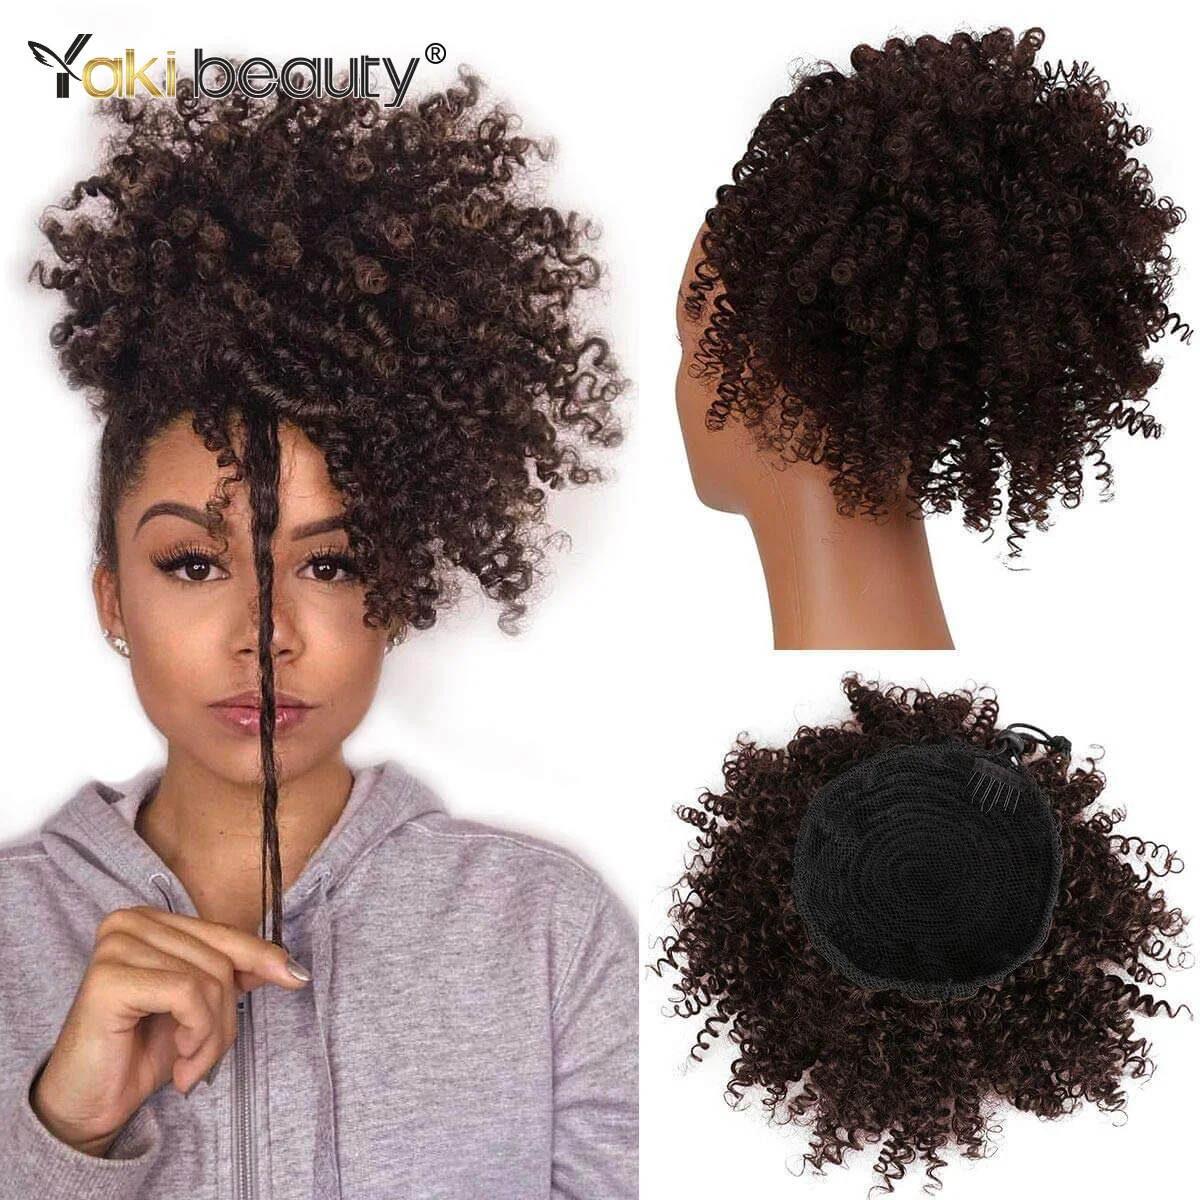 Synthetic Afro Puff Curly Chignon 12inch Short Kinky Curly Drawstring Ponytail Hair Extension Hairpieces For Women